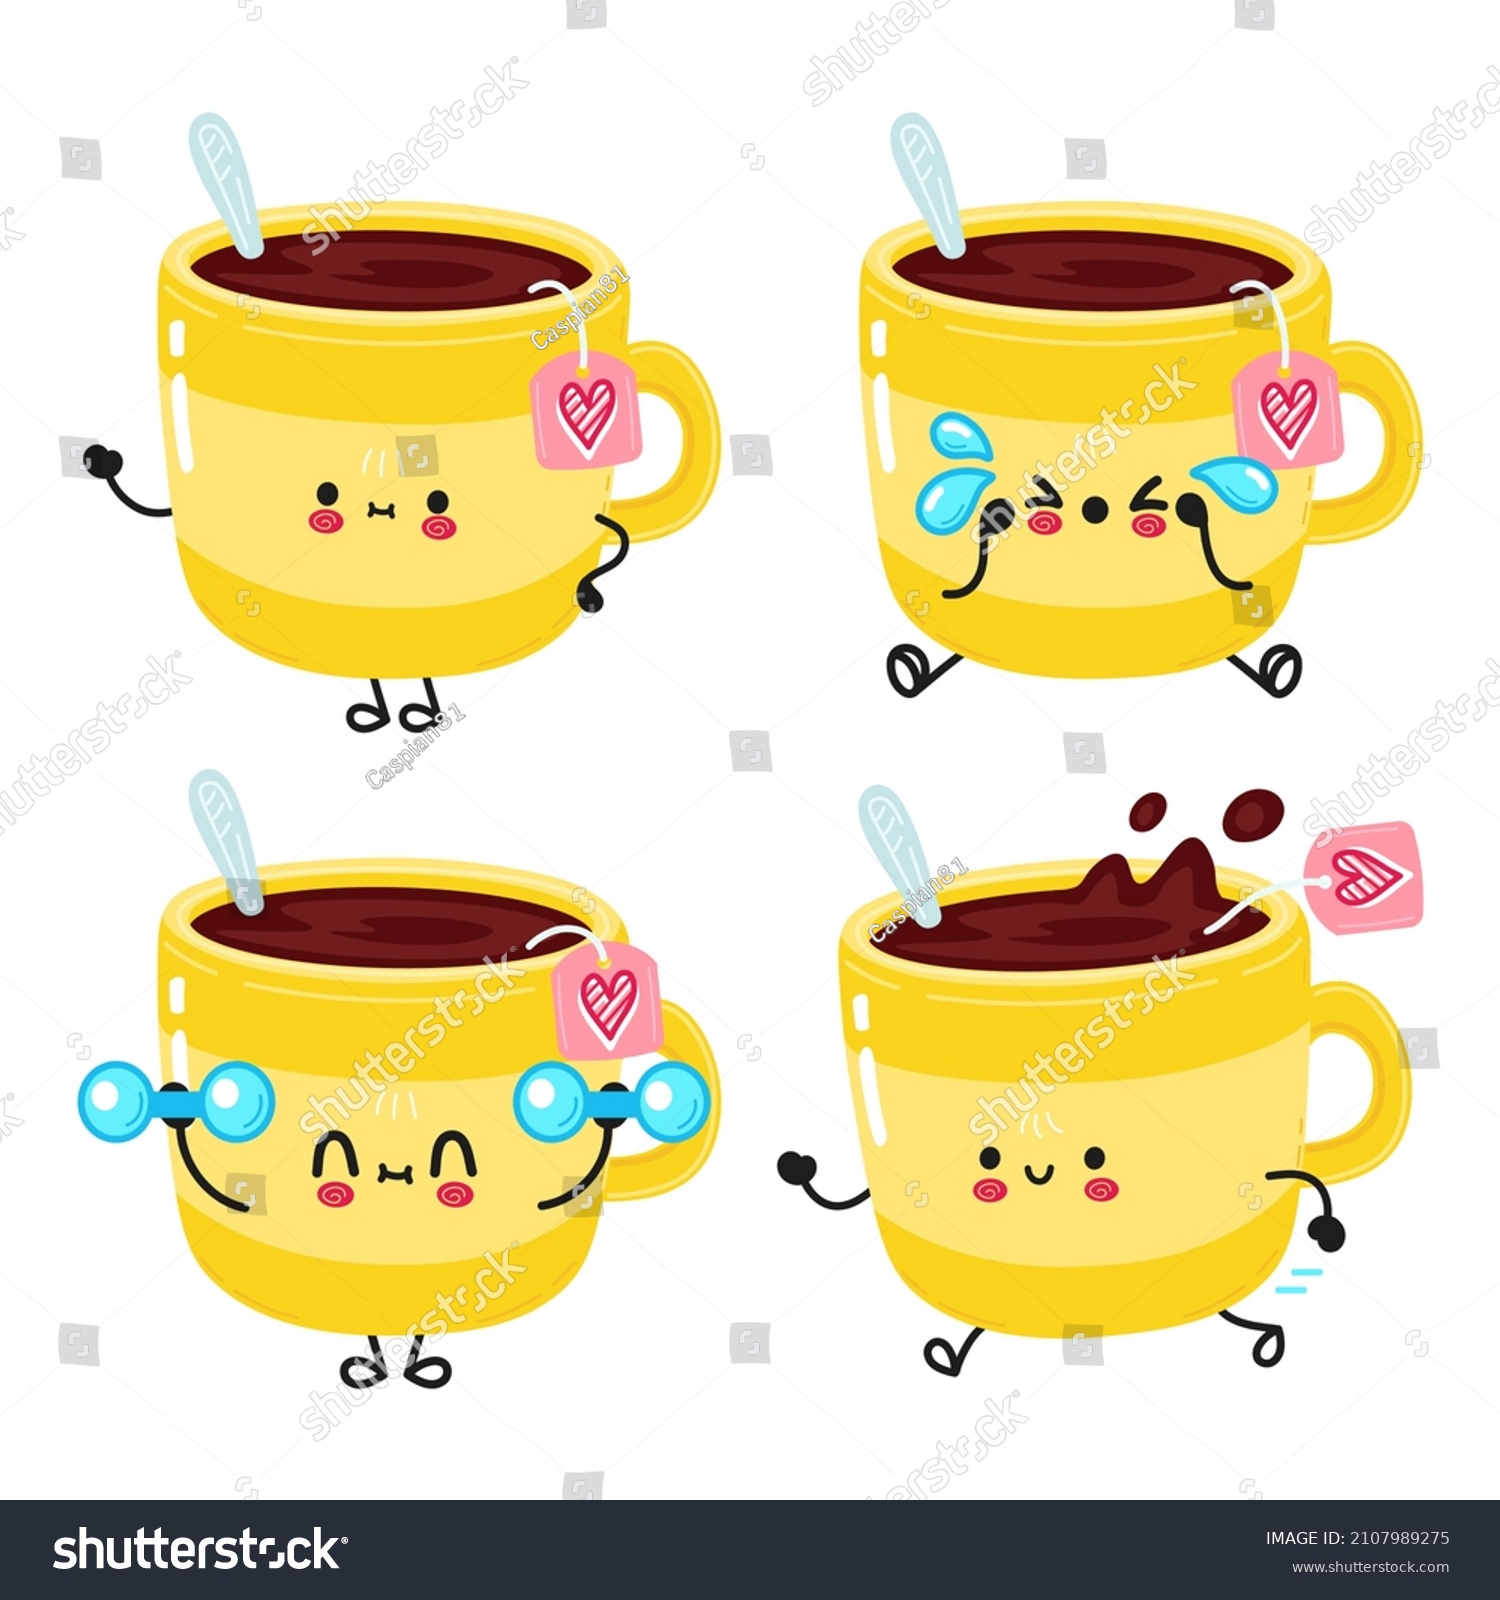 Funny cute happy cup of tea characters bundle set. Vector hand drawn doodle style cartoon character illustration icon design. Cute yellow cup of tea mascot character collection #2107989275